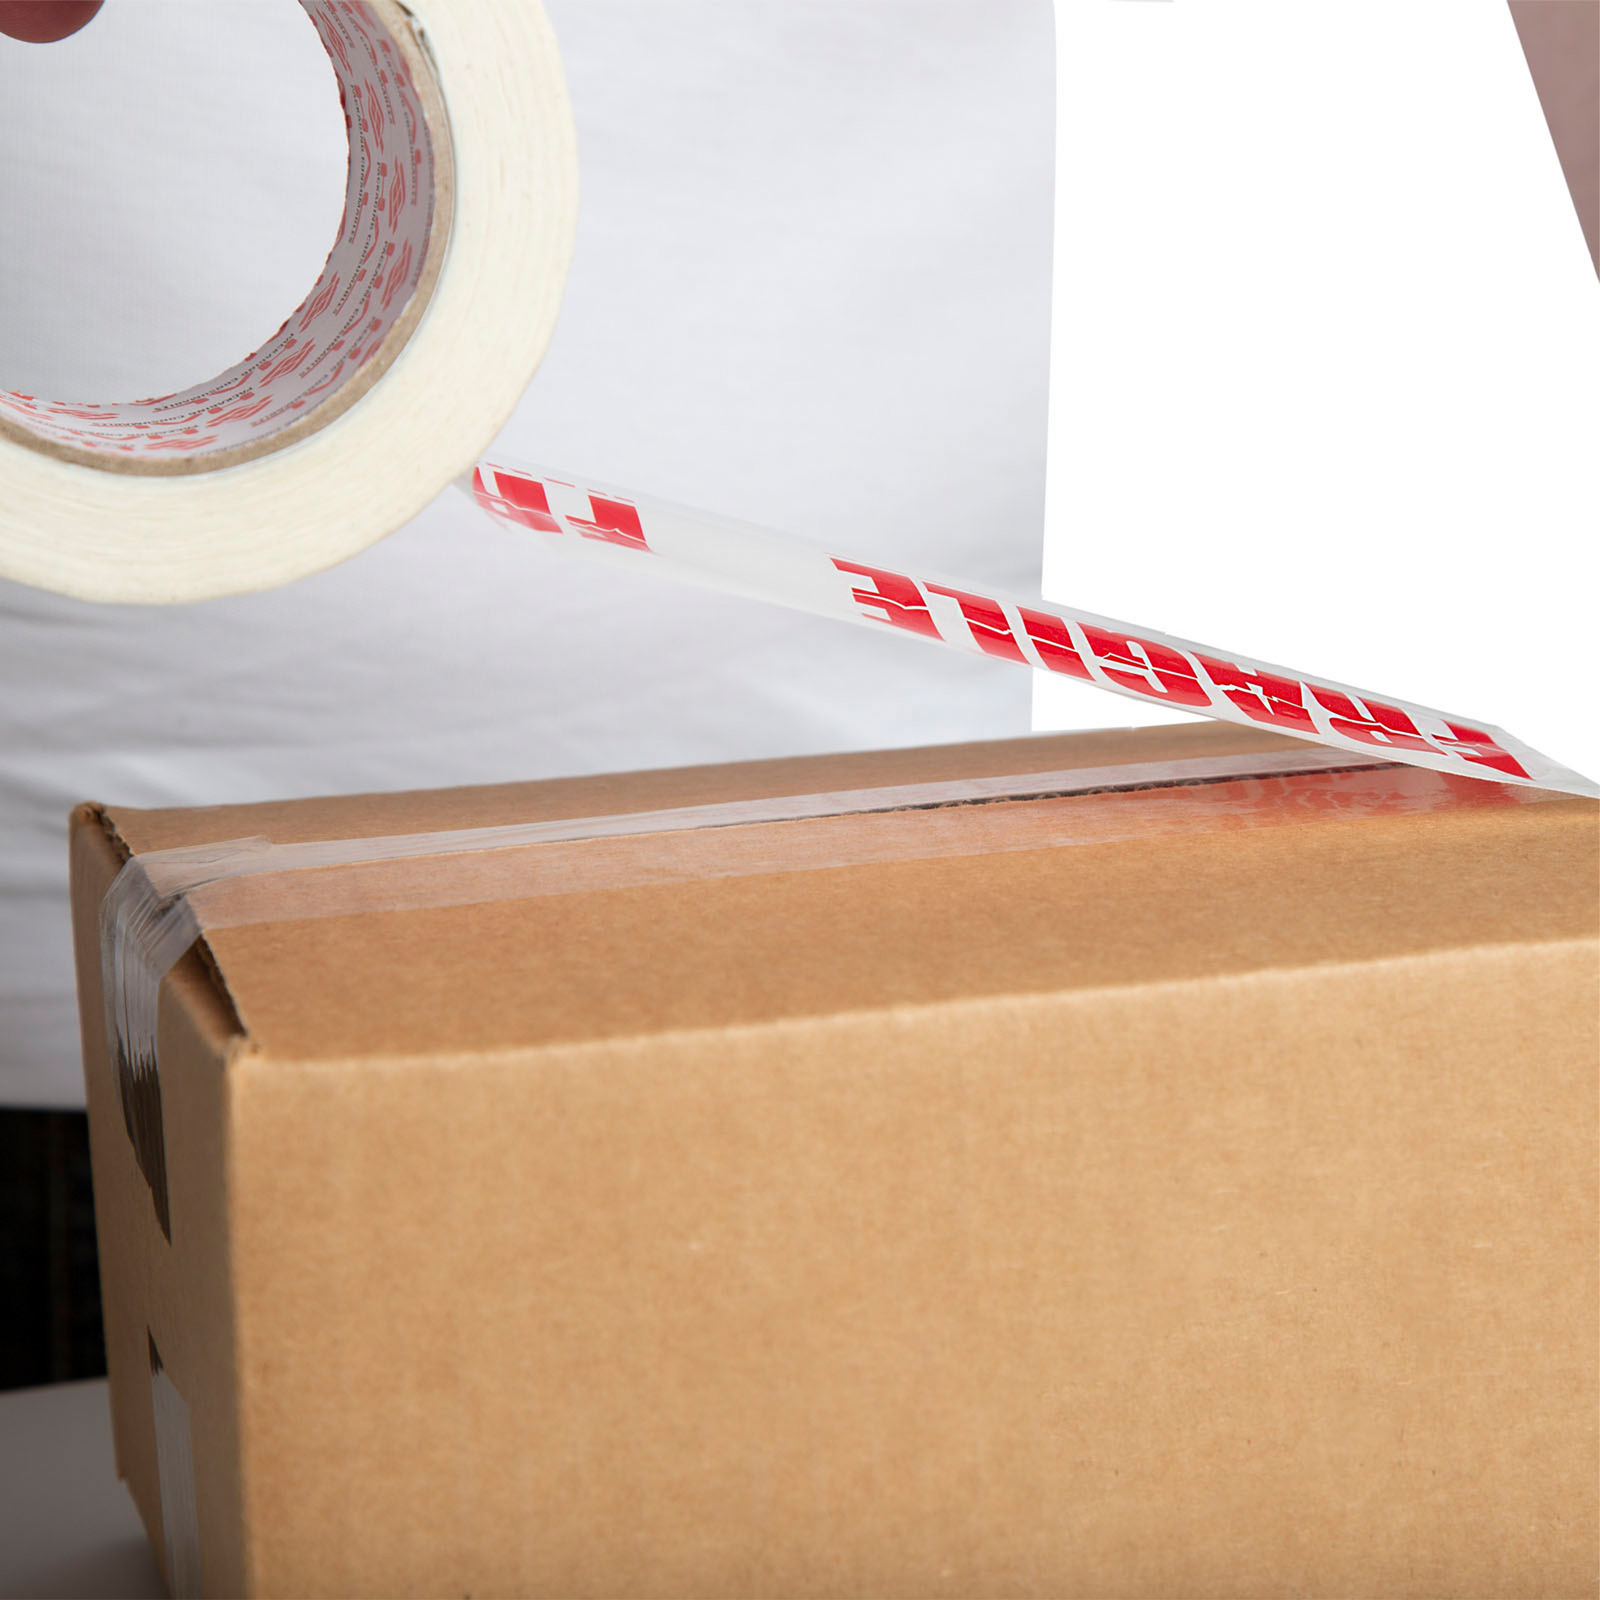 person wearing white shirt using white printed tape fragile to tape together brown box